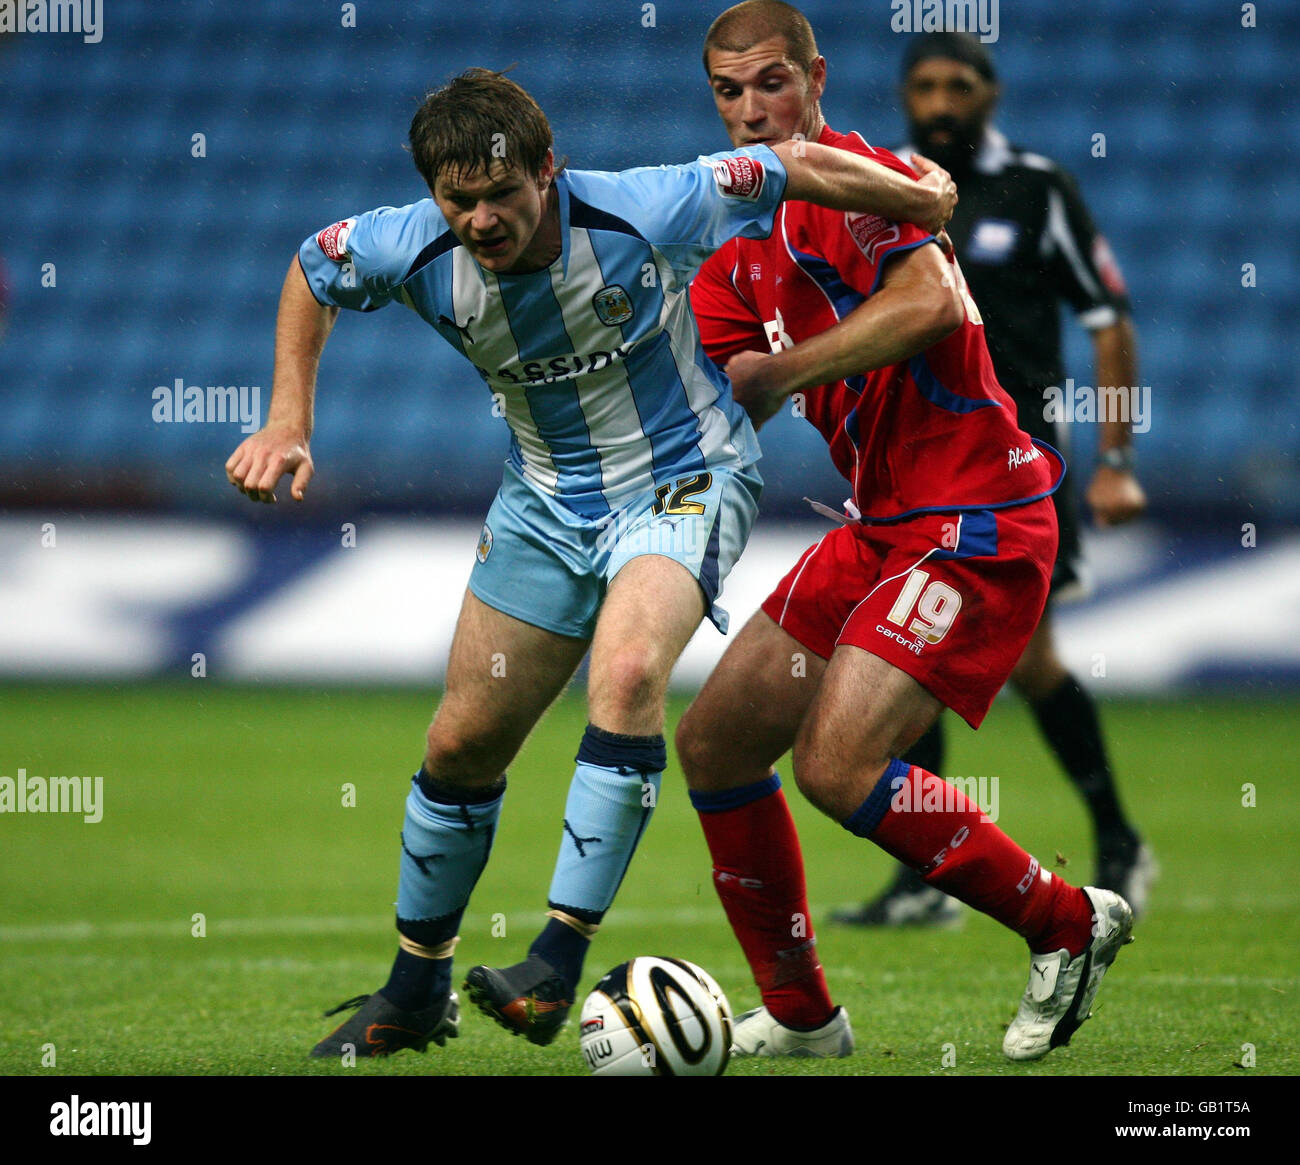 Coventry City's Aron Gunnarsson (left) is challenged by Aldershot's Ben Harding during the Carling Cup match at the Ricoh Arena, Coventry. Stock Photo